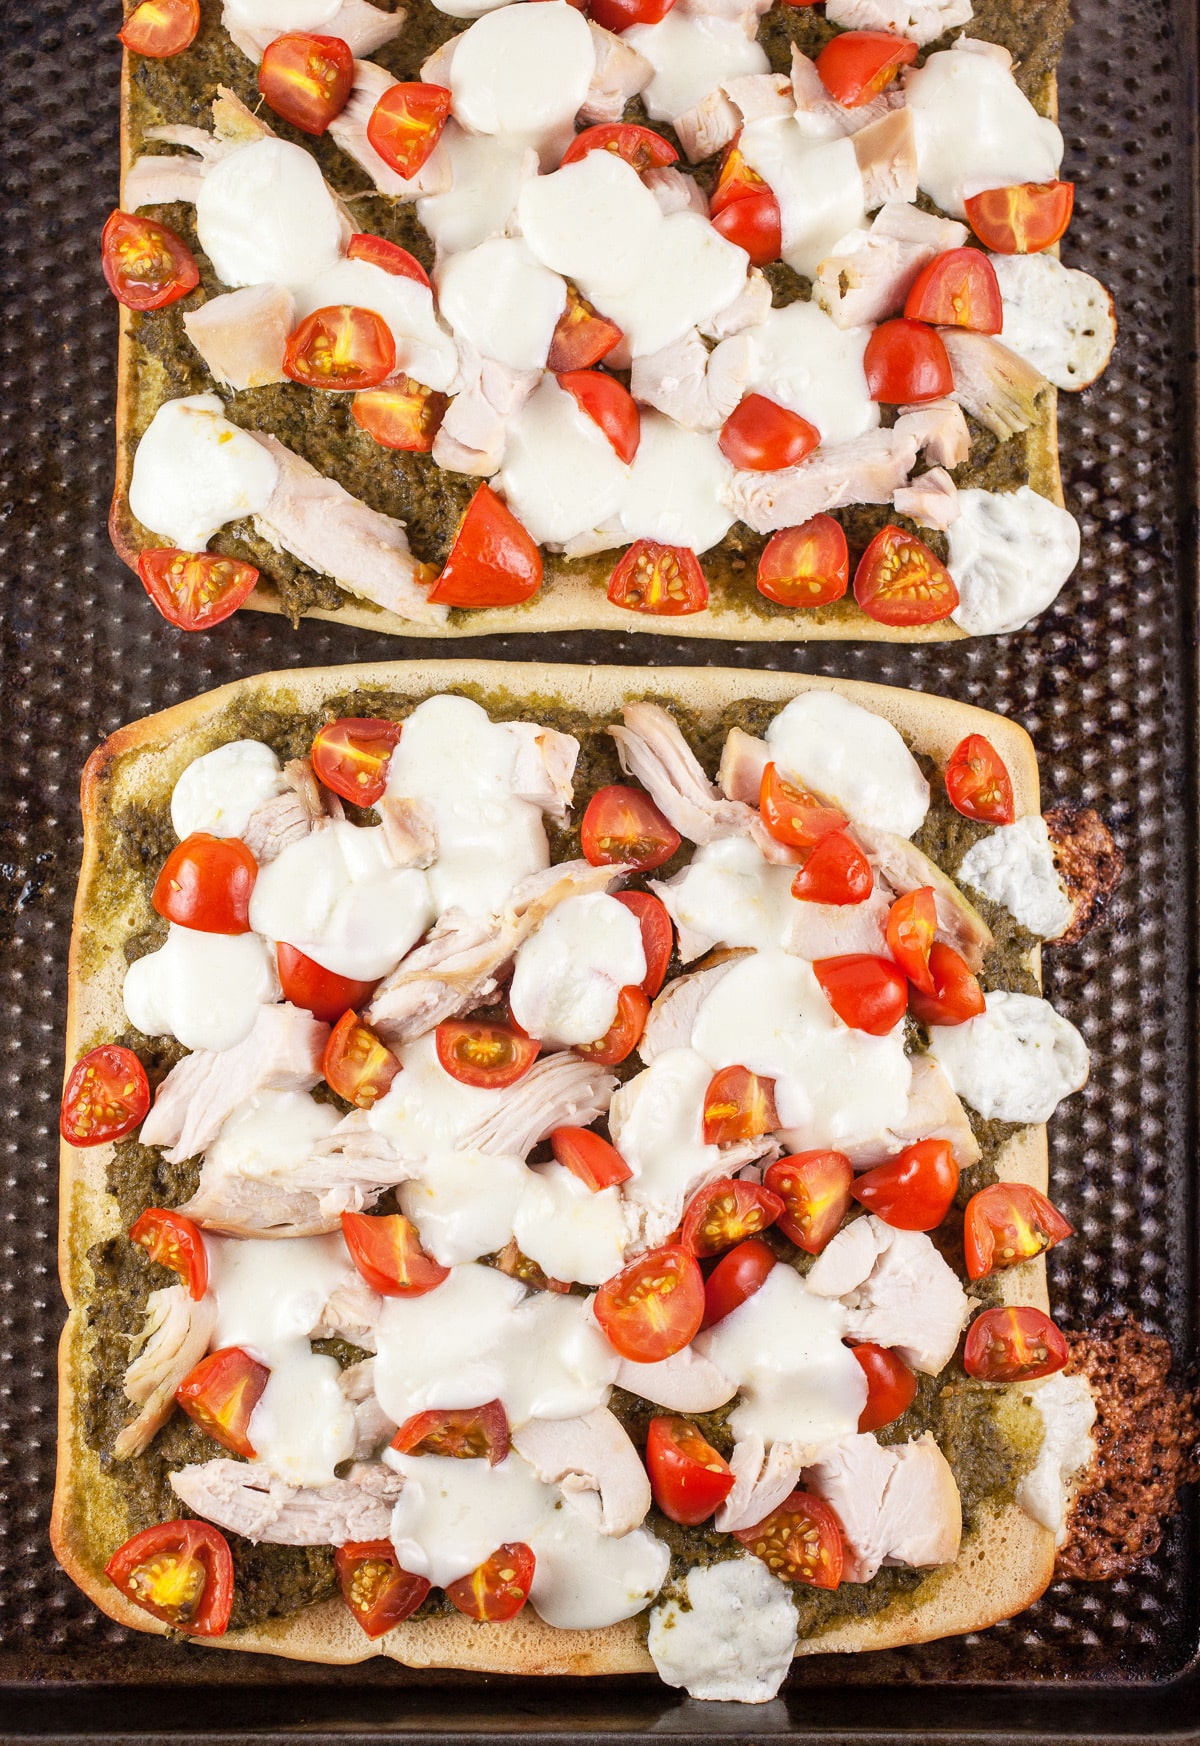 Cooked flatbread pizzas on baking sheet.